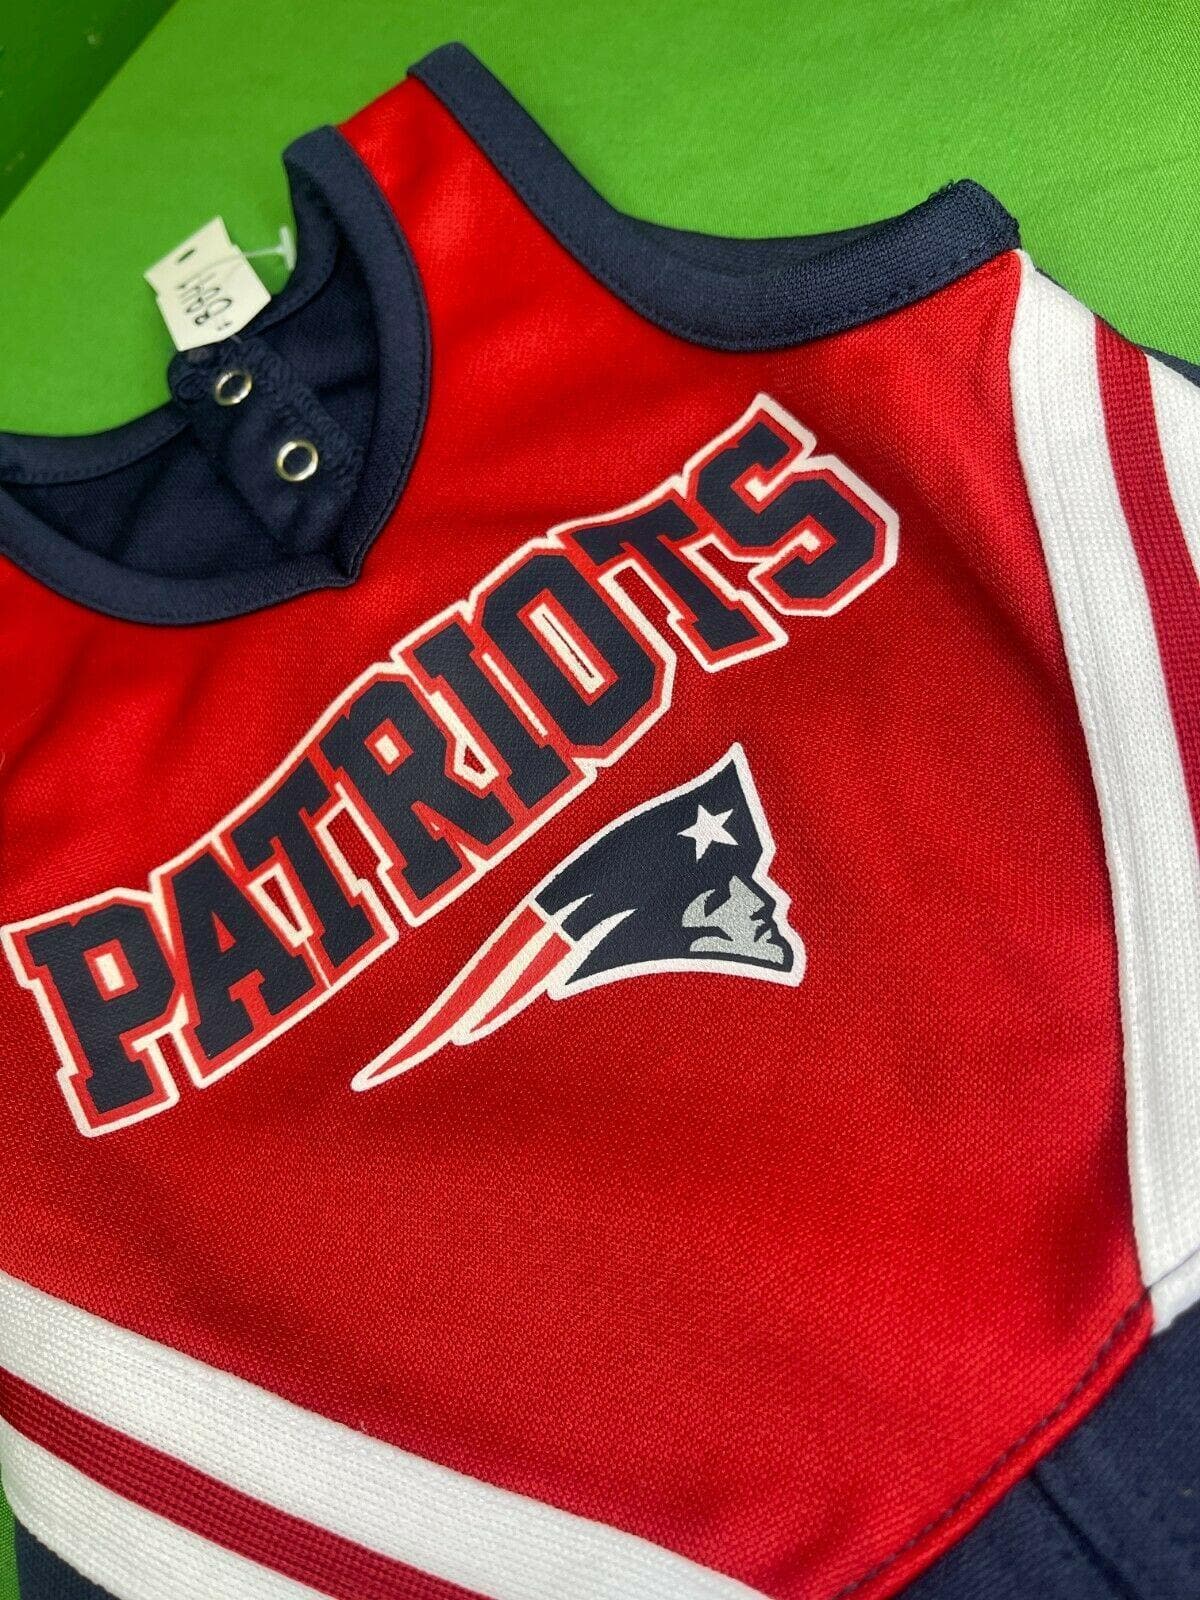 NFL New England Patriots Cheerleader-Style Dress and Nappy Cover 12 months